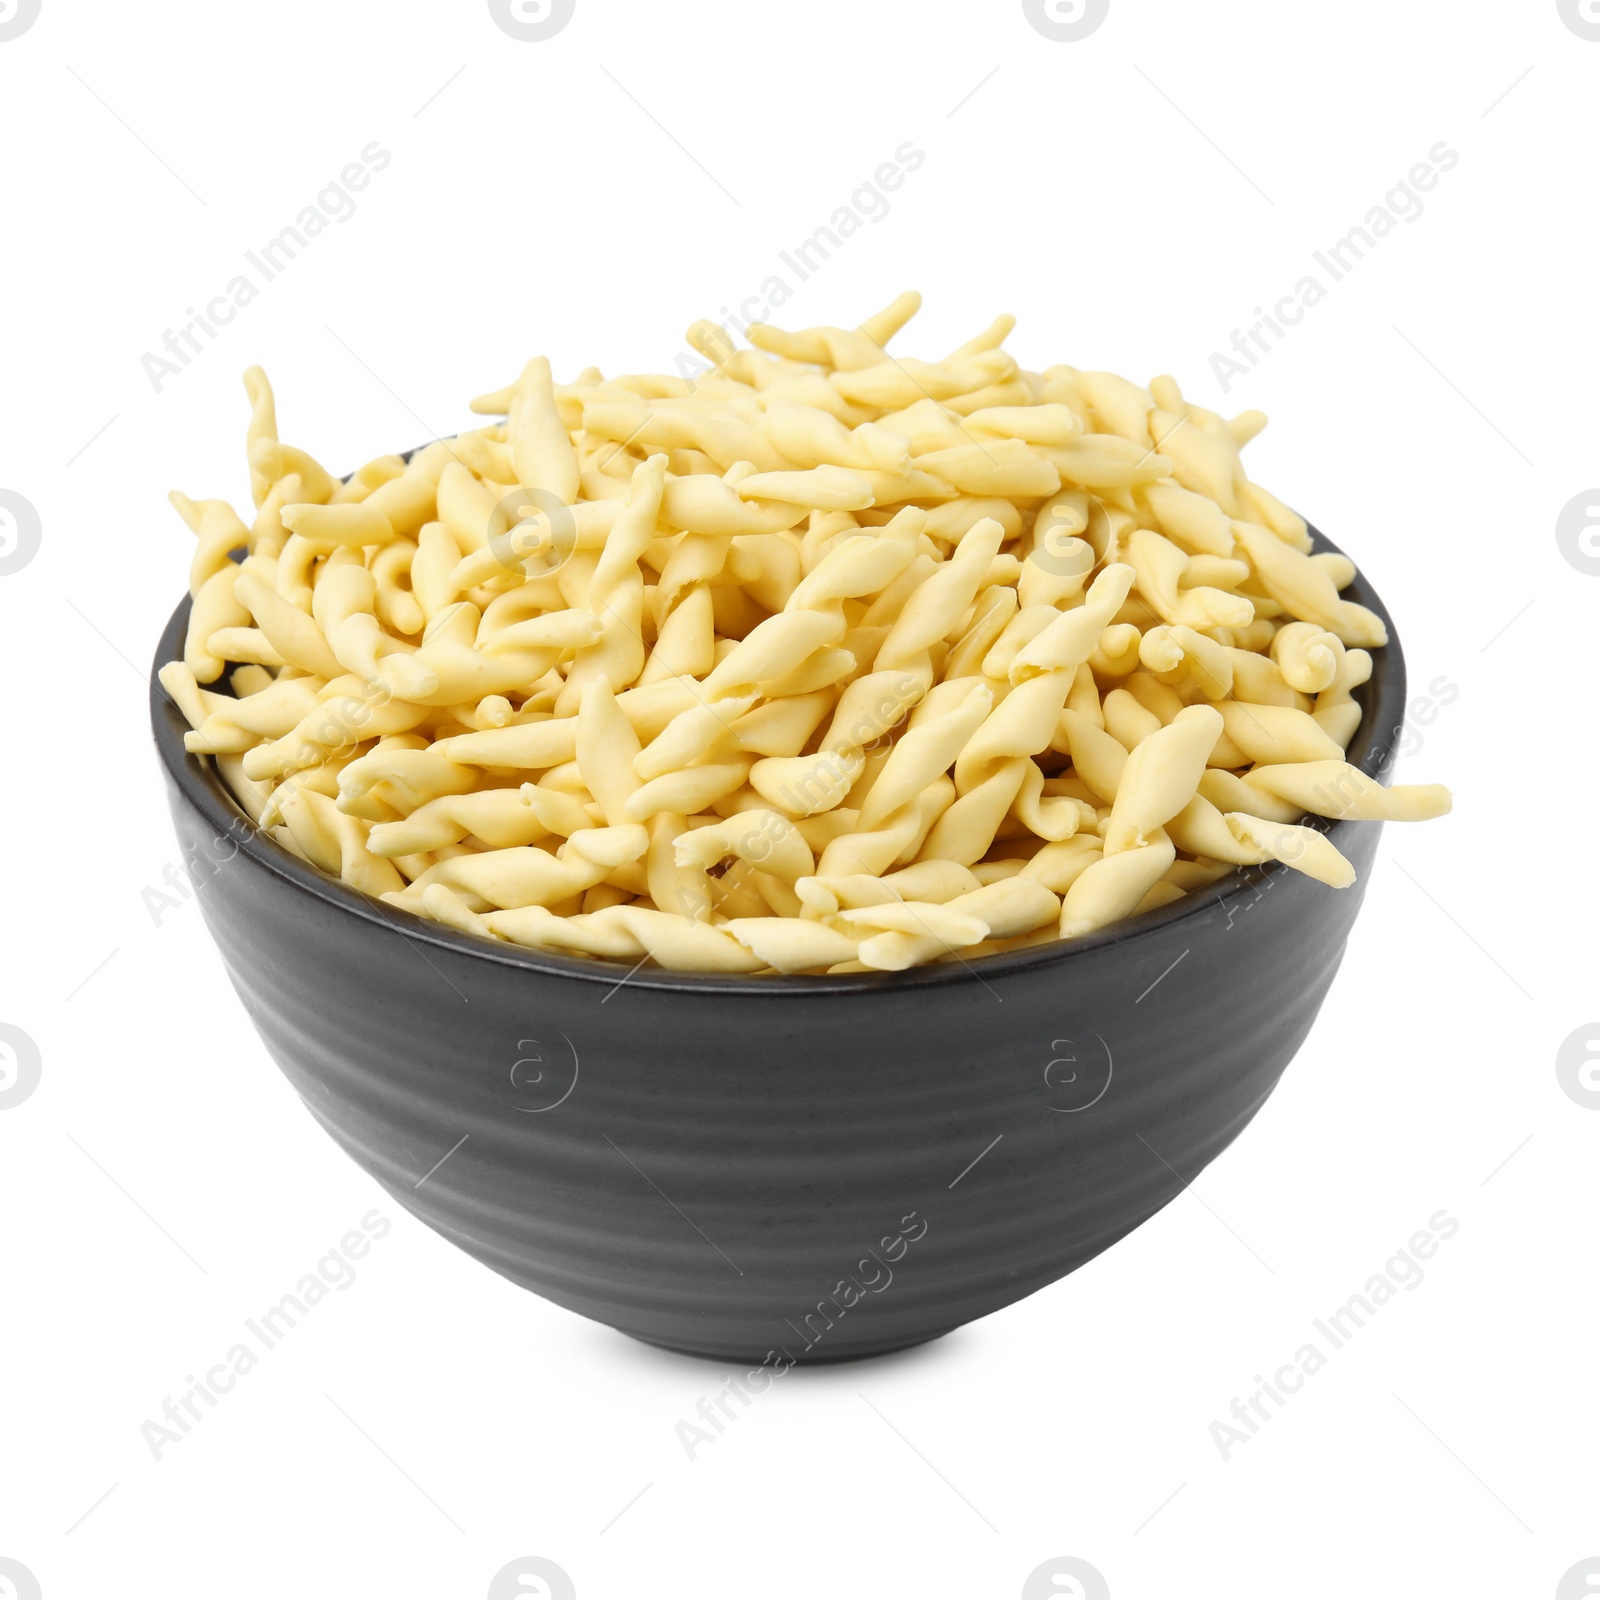 Photo of Uncooked trofie pasta in bowl isolated on white